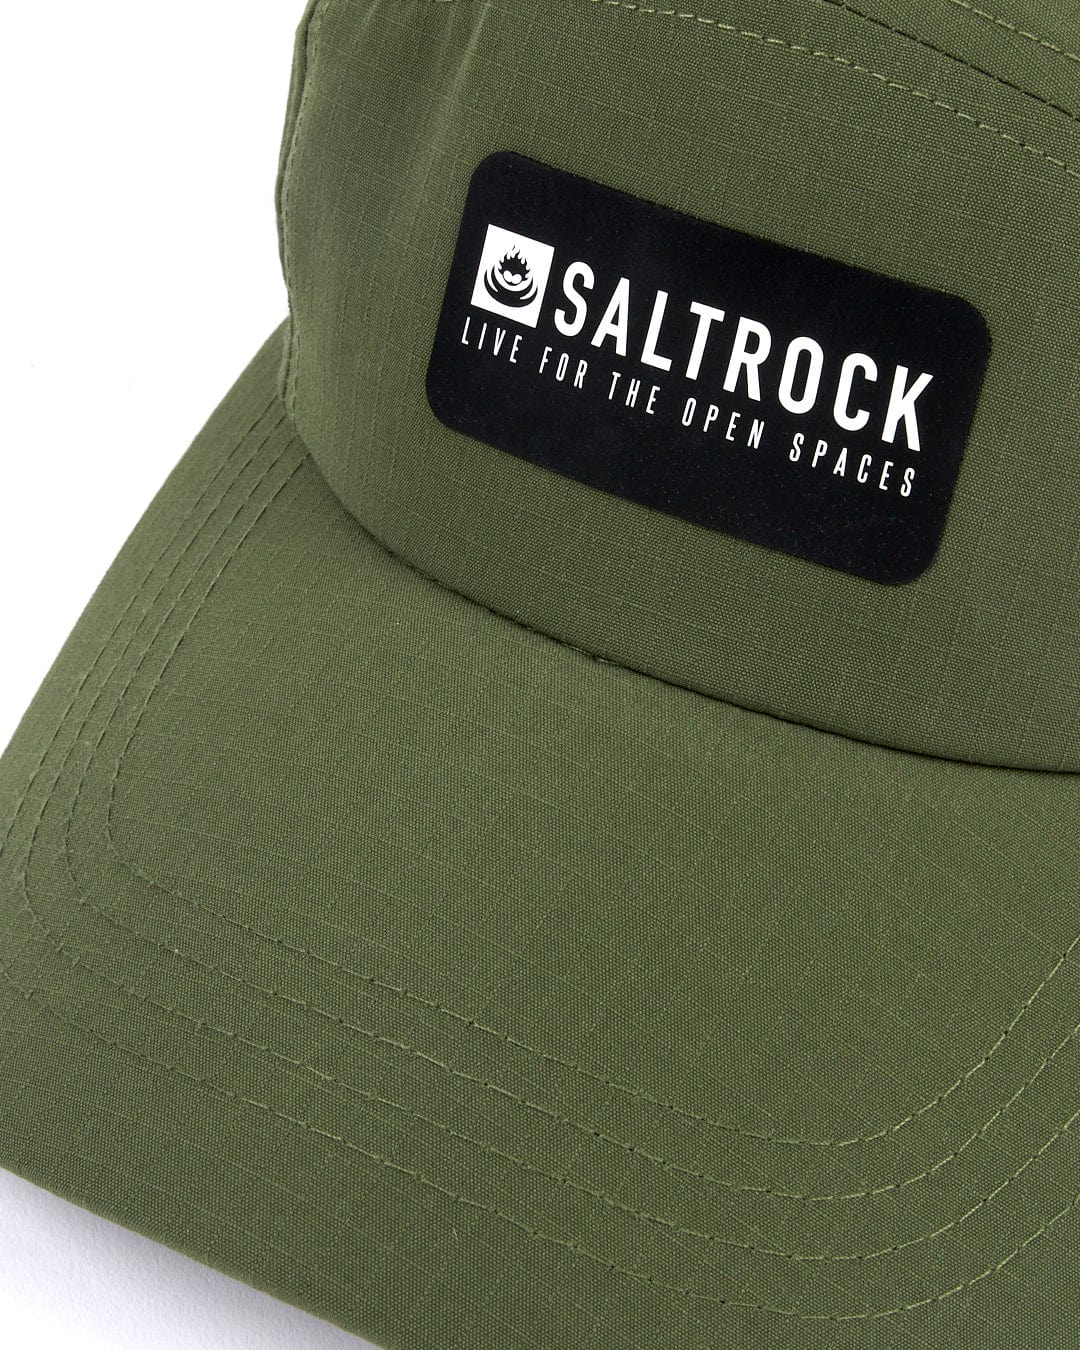 A Saltrock green Gaitor 5 Panel UPF Cap with the Saltrock logo and an adjustable strap.